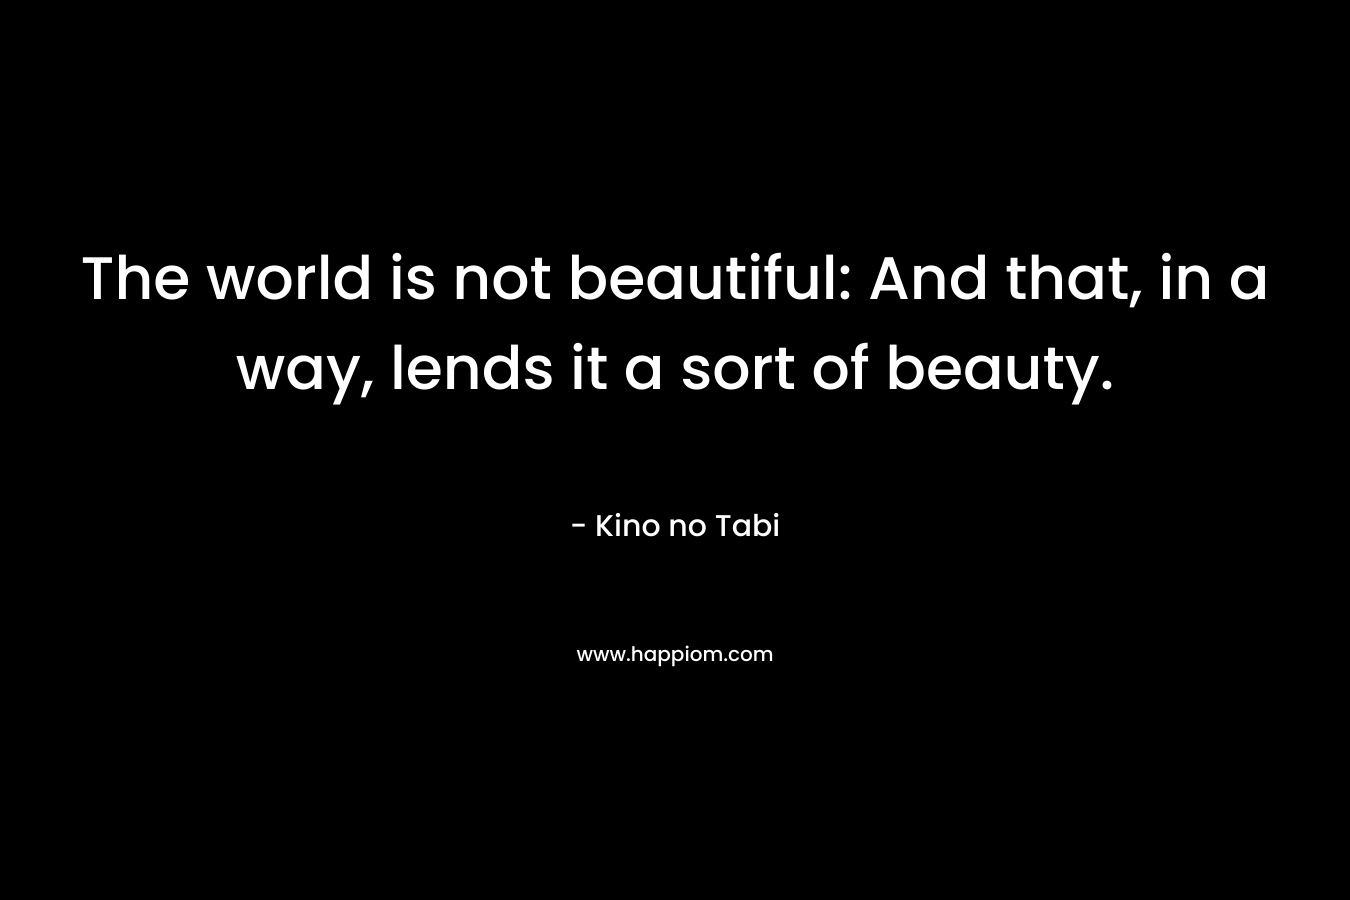 The world is not beautiful: And that, in a way, lends it a sort of beauty. – Kino no Tabi